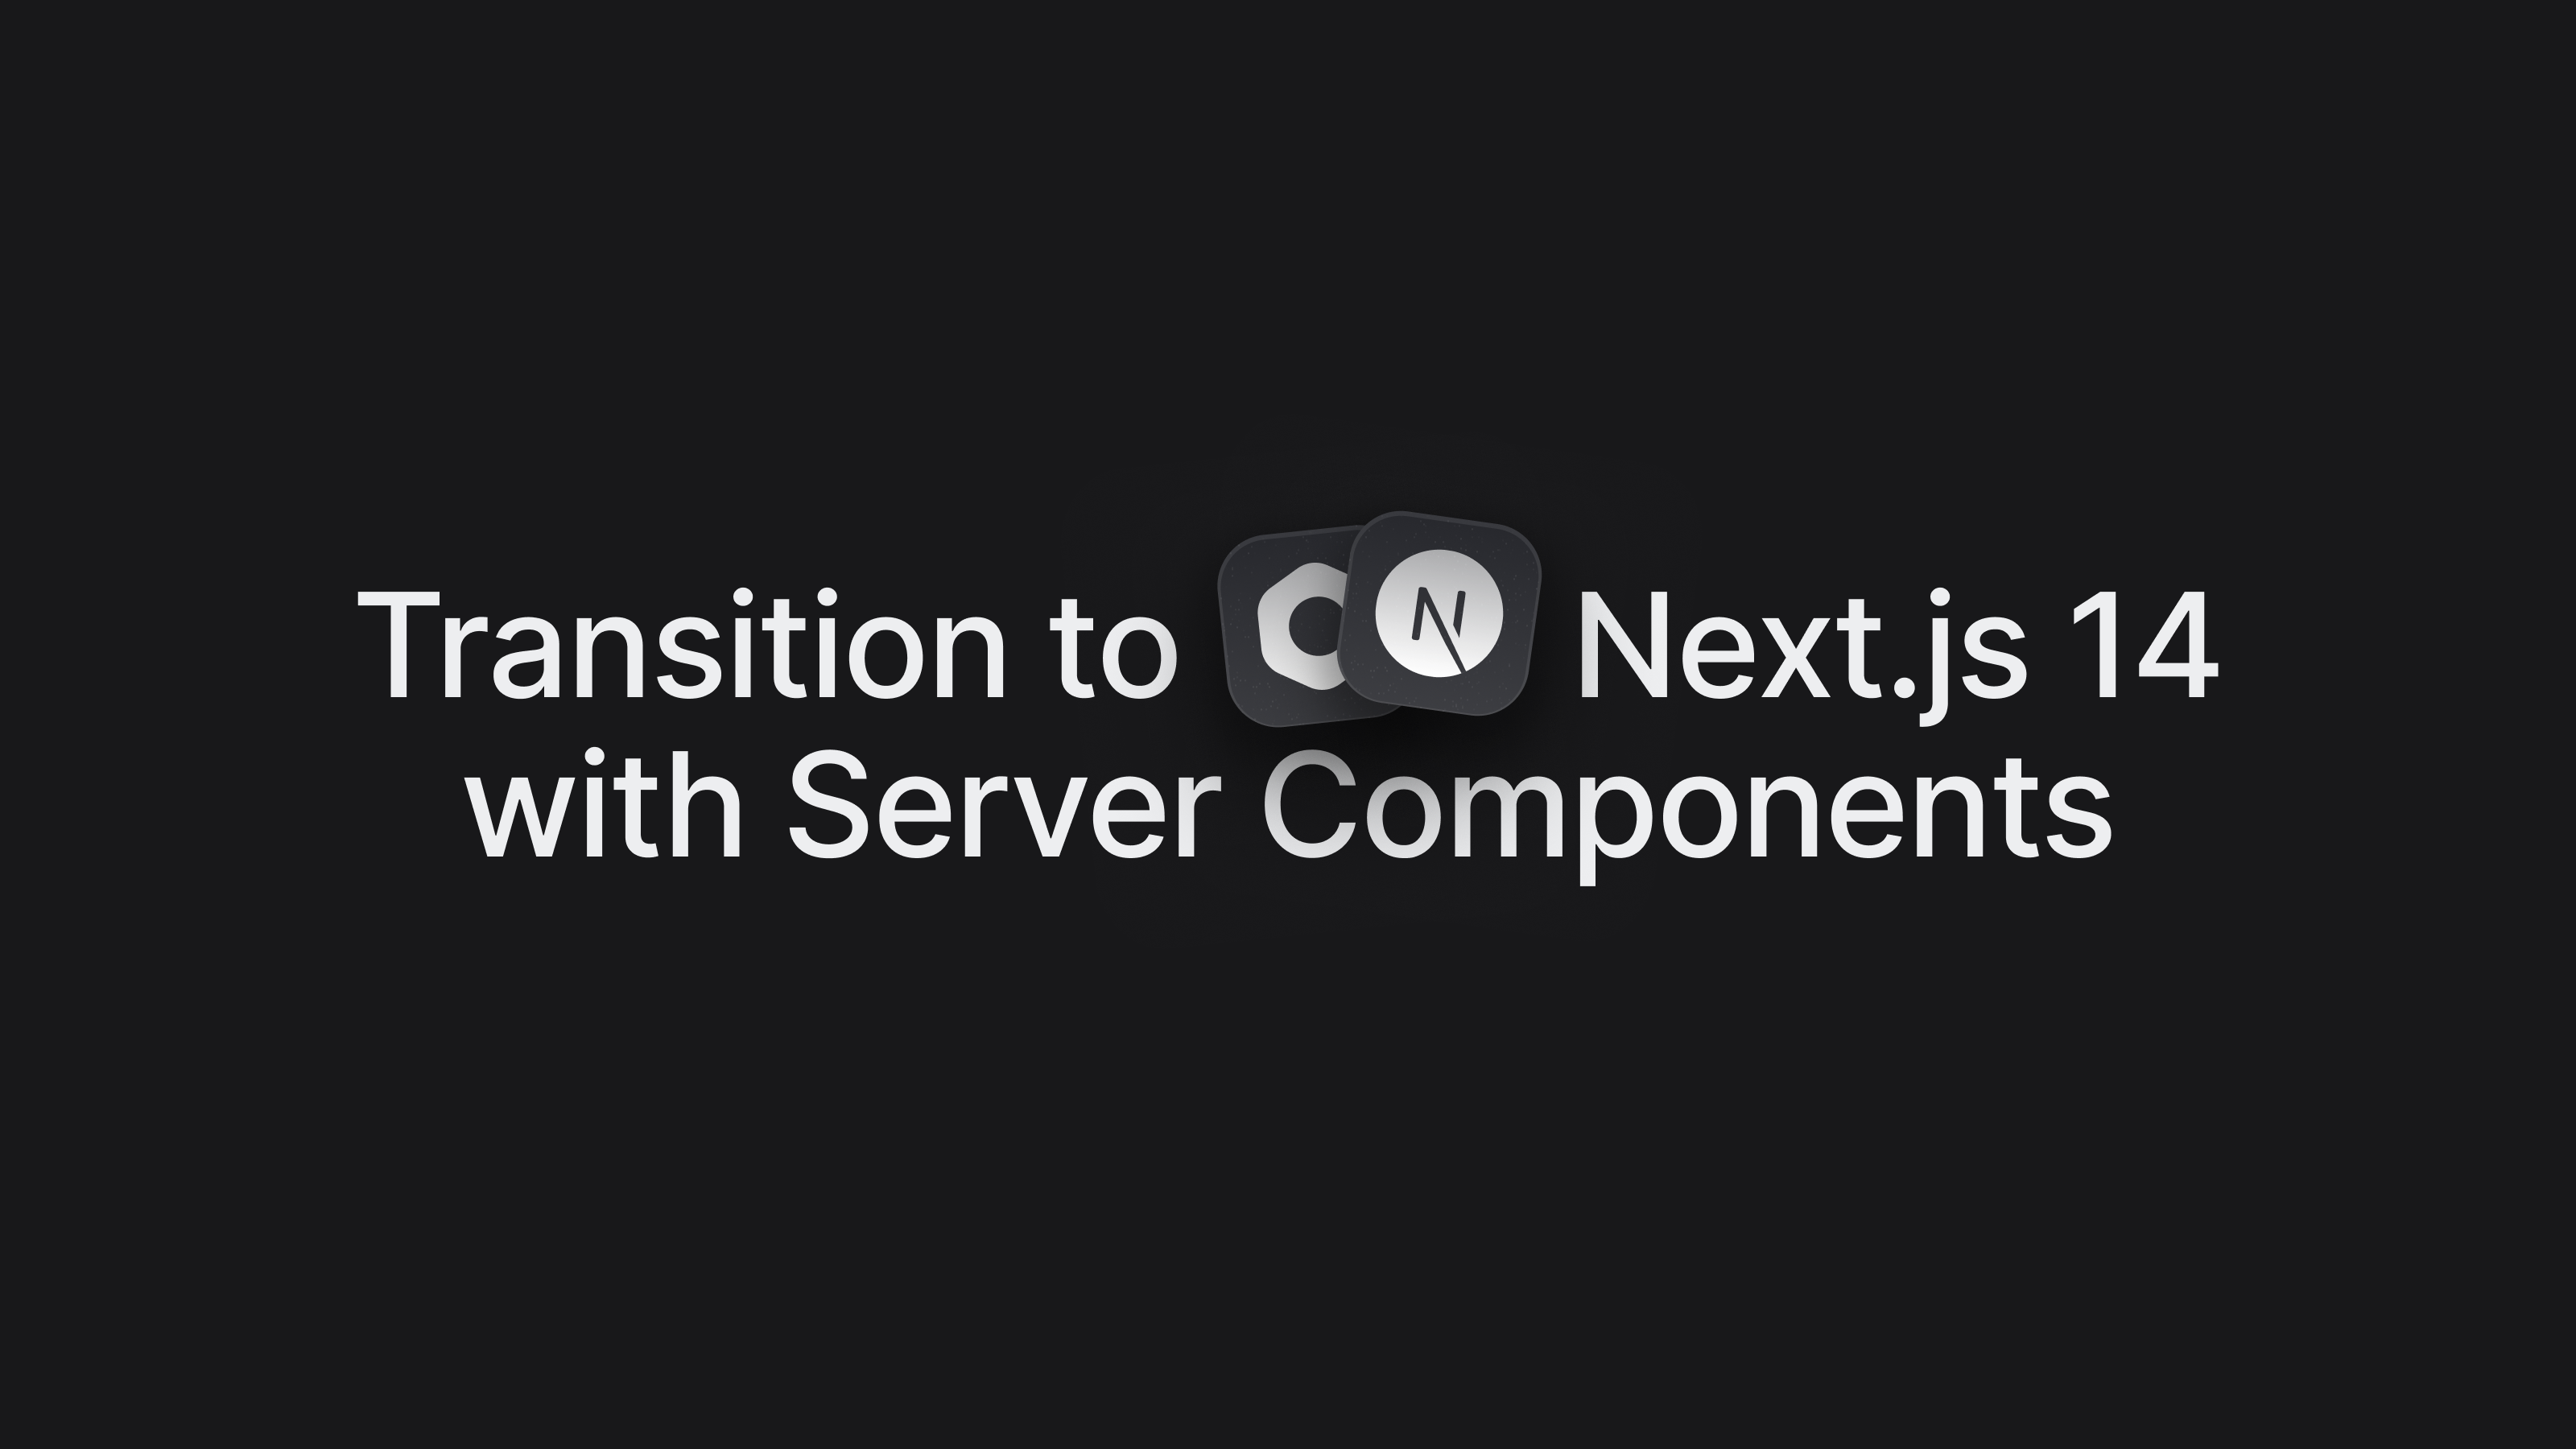 What we’ve learned from the transition to Next.js 14 with Server Components